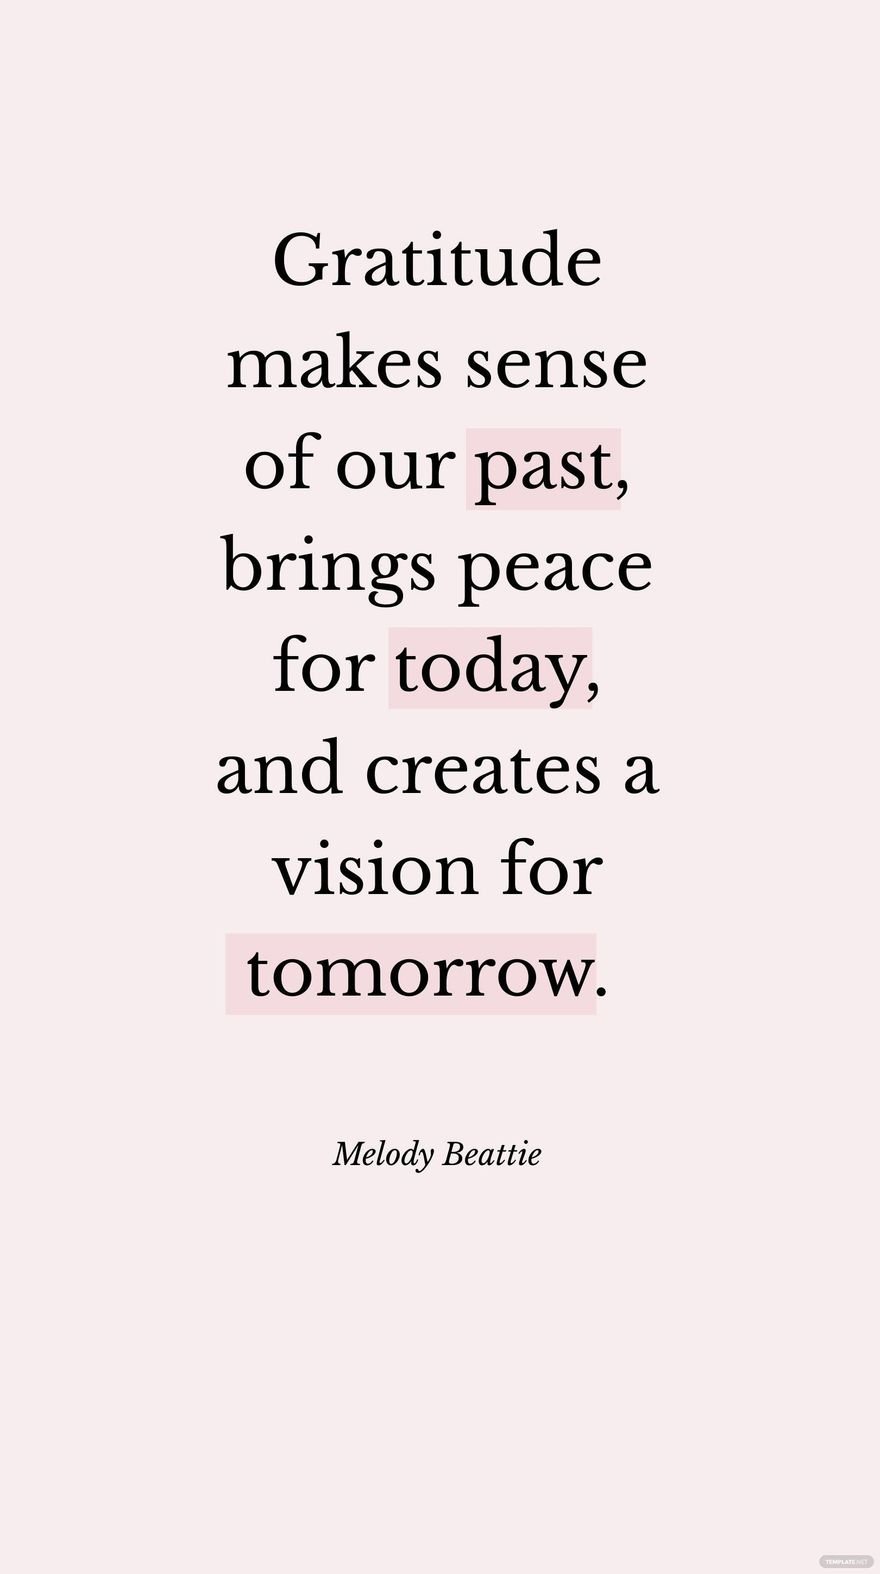 Melody Beattie - Gratitude makes sense of our past, brings peace for today, and creates a vision for tomorrow.